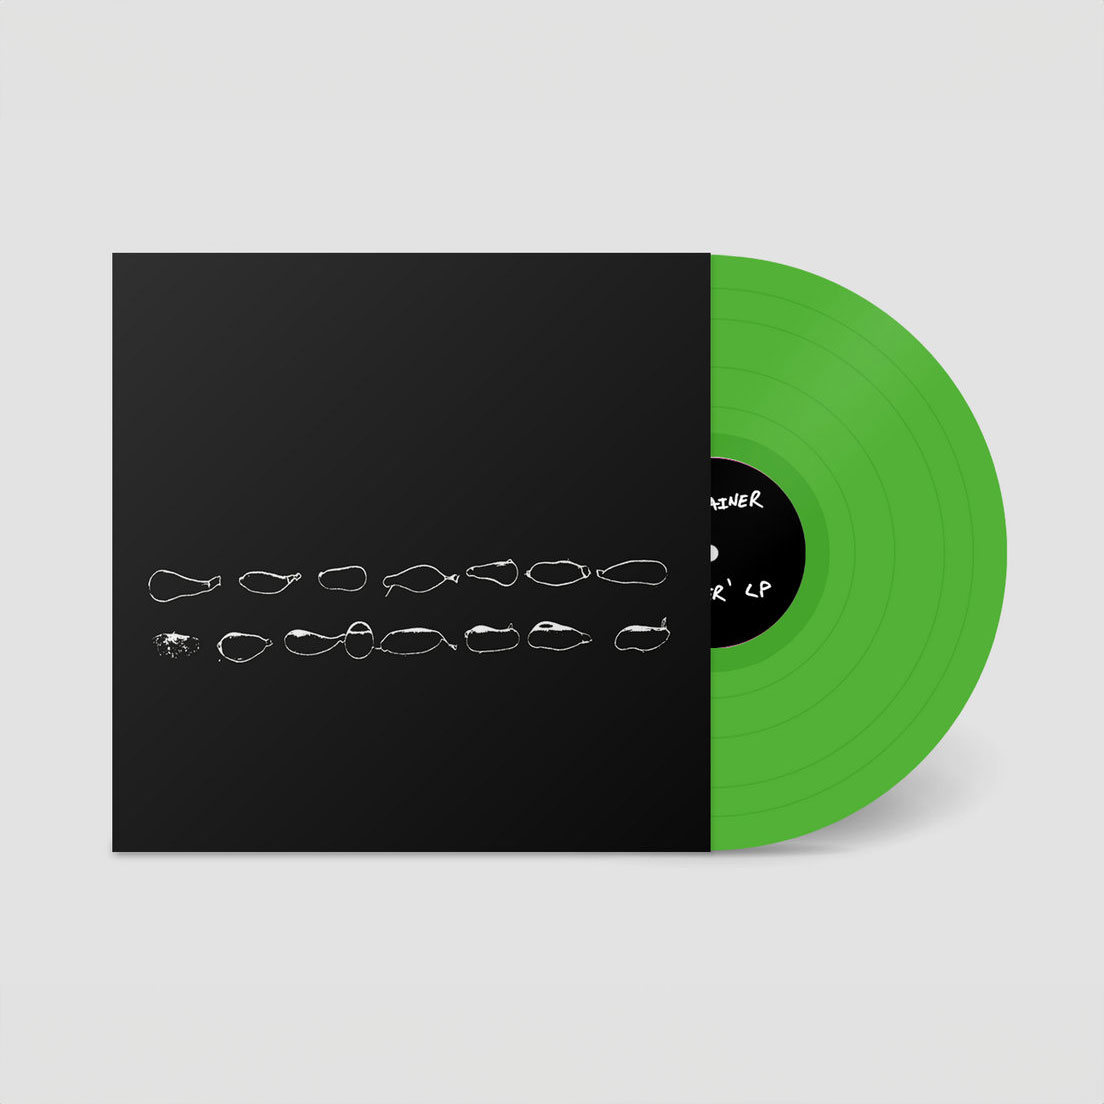 Pre-Order Now: Container - Yacker Alter l8r.it/LTQ5 + Neon green vinyl Both searing pain and absurdist detached humour can be found within these harsh grooves. Very highly recommended.